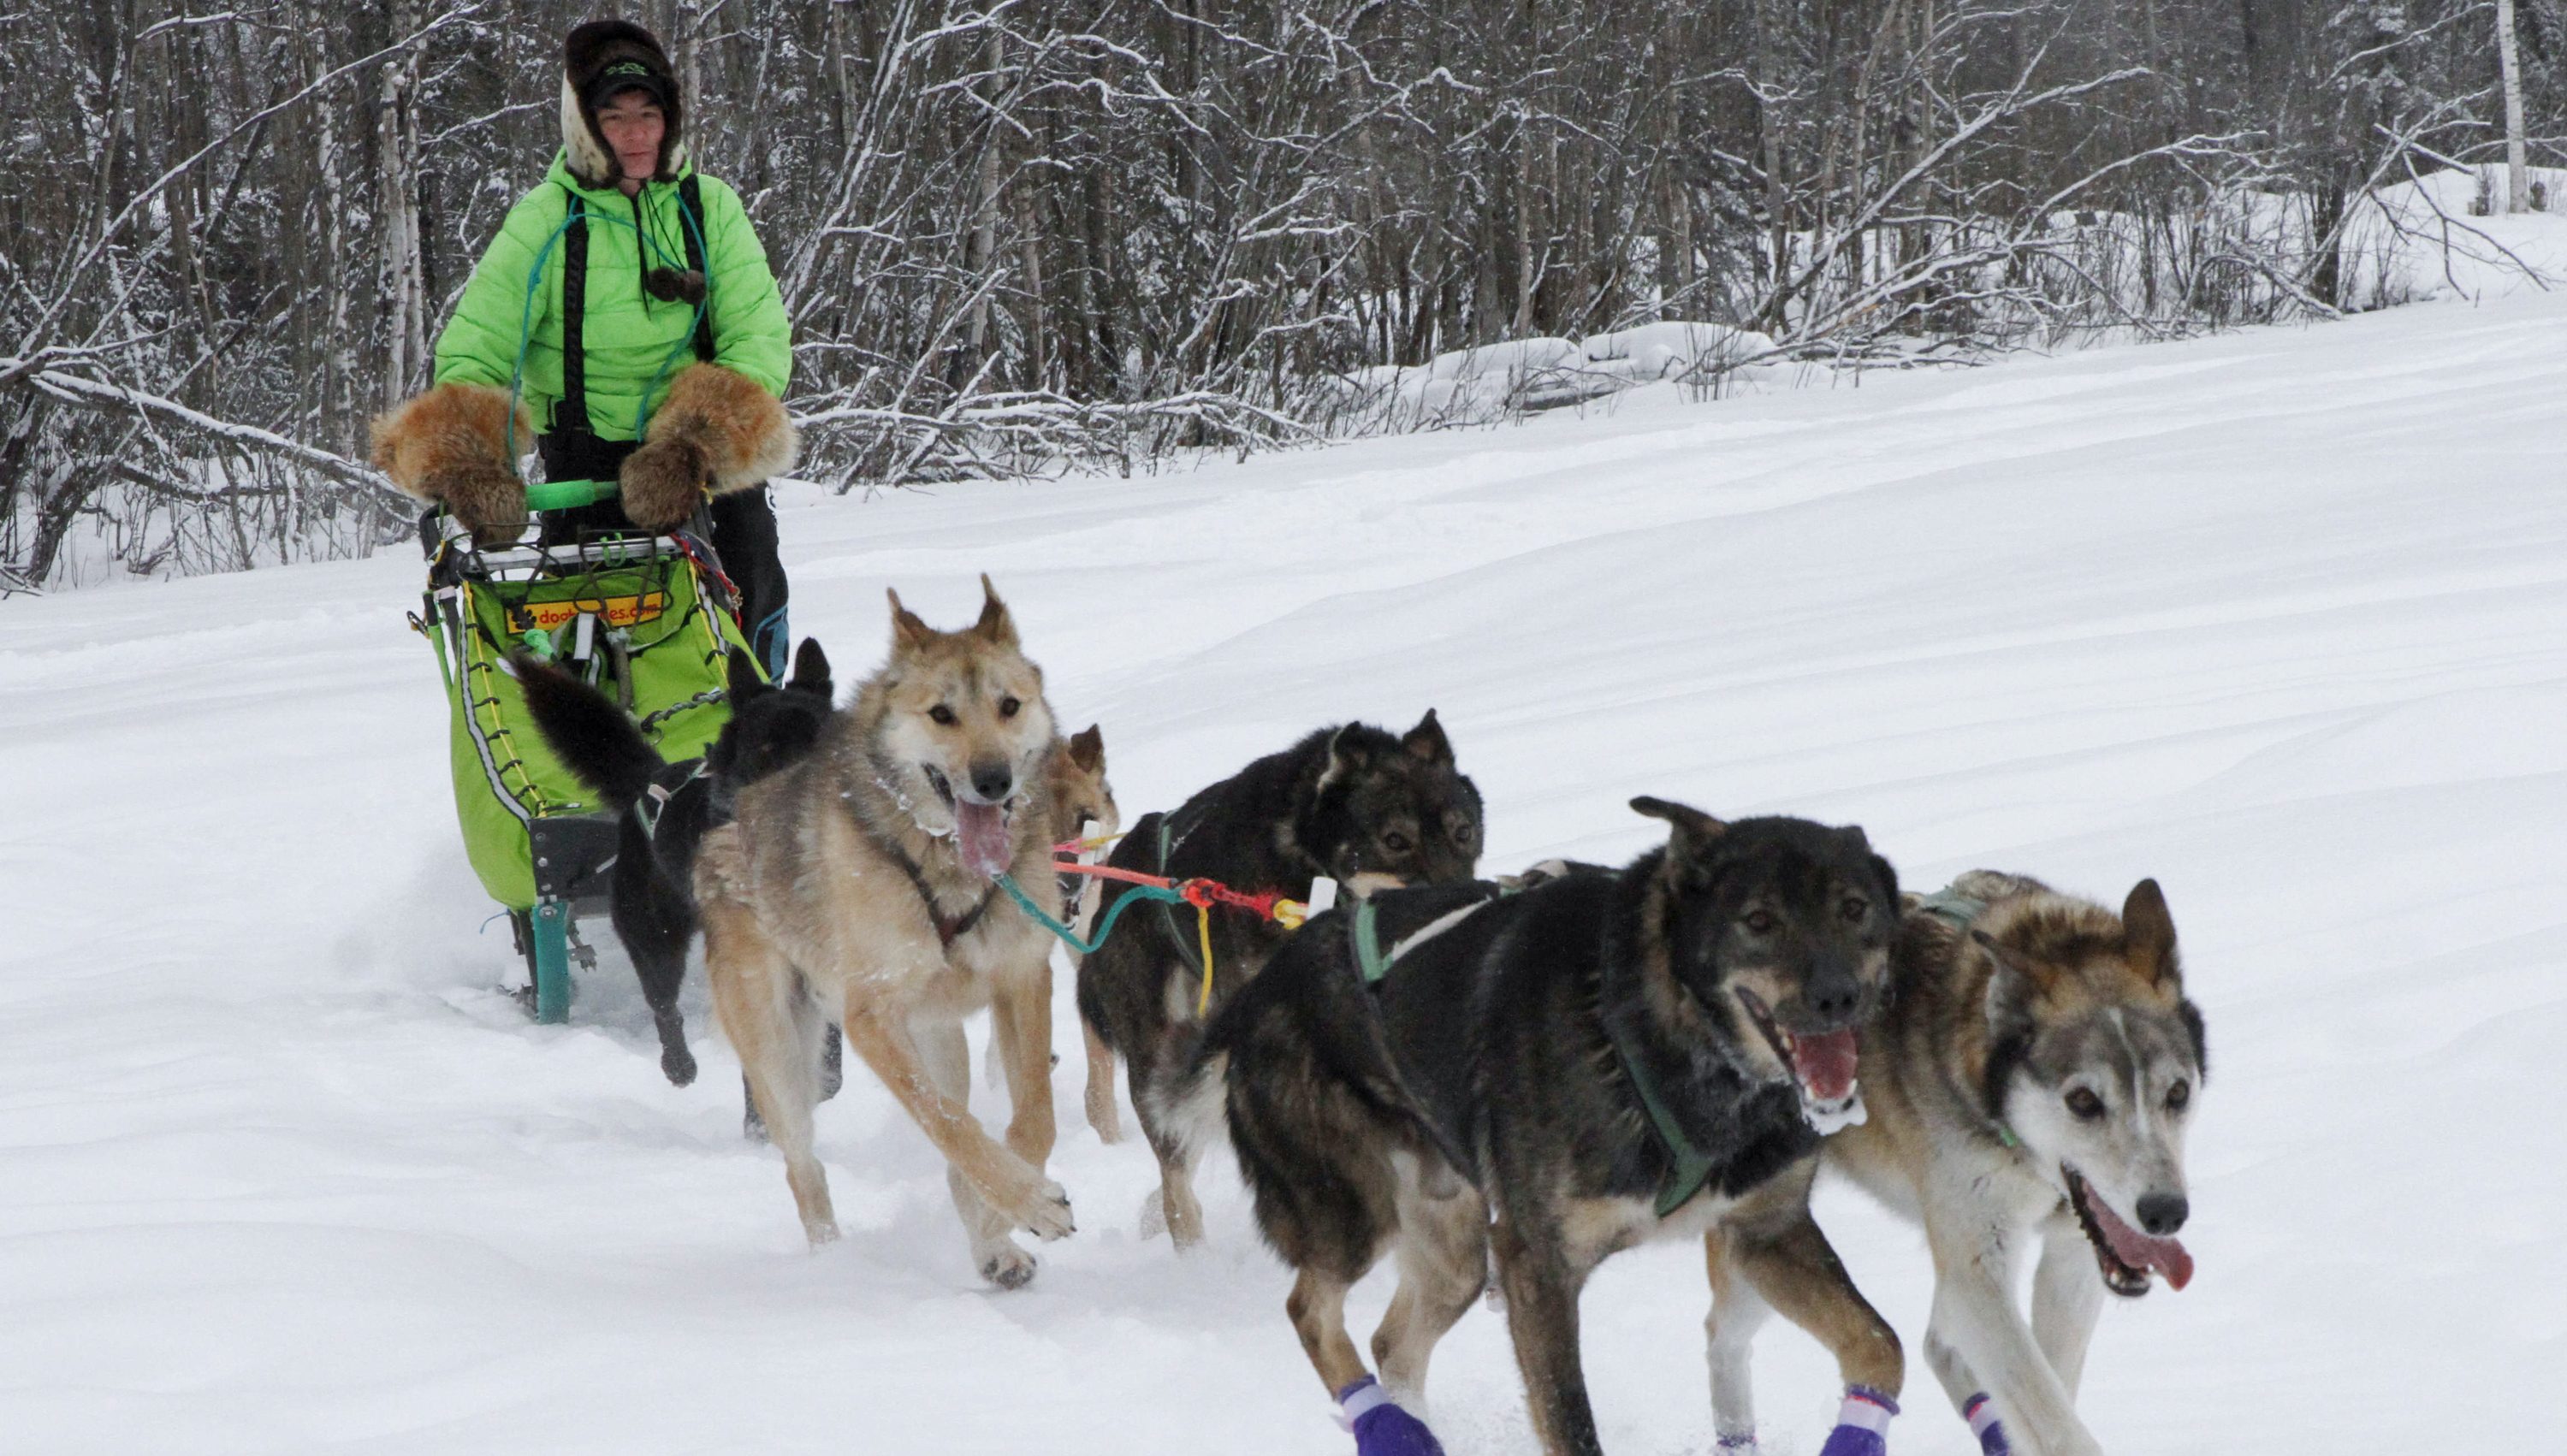 Alaska's Iditarod to offer visibility harnesses after 5 dogs die